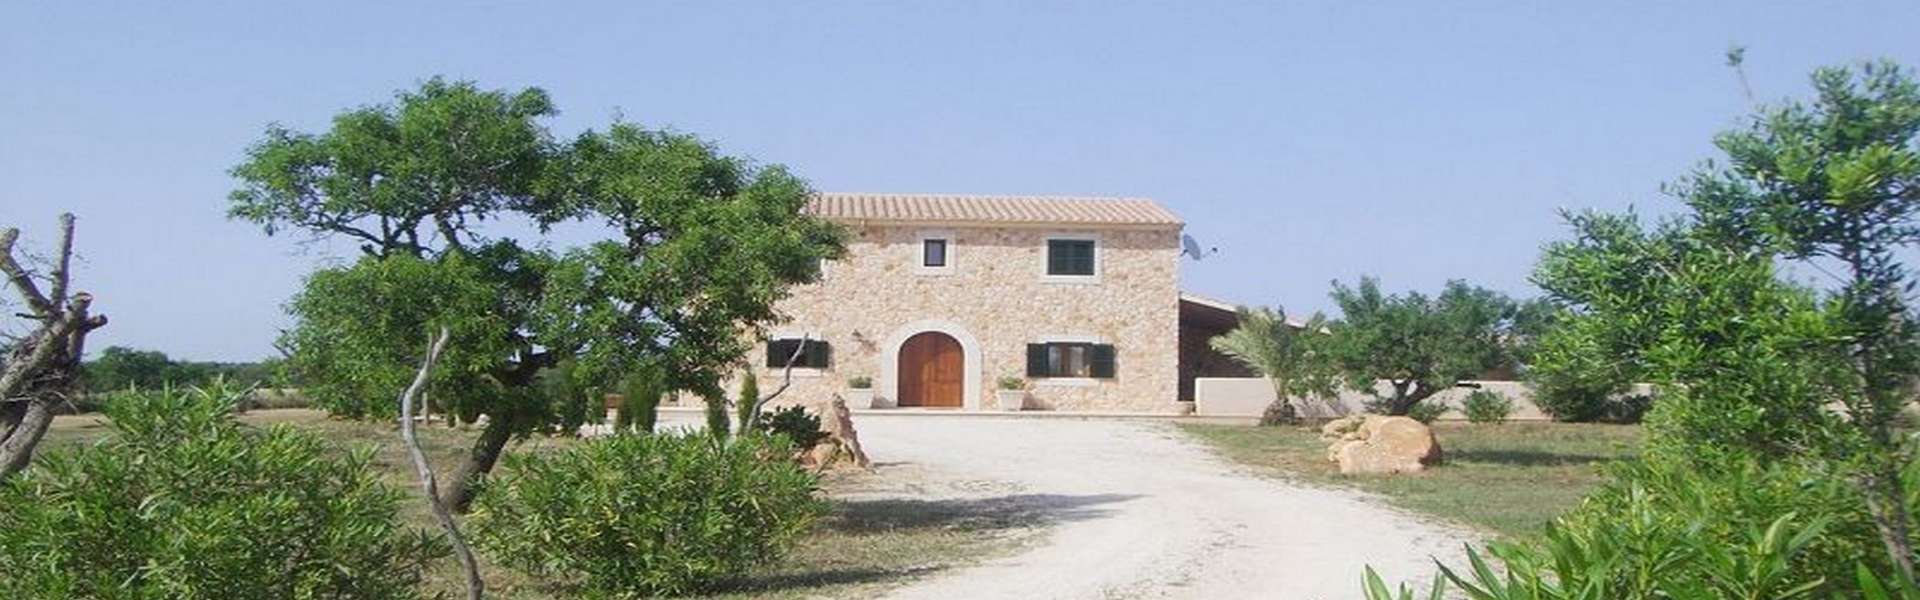 Charming Finca in Es Llombards for sale  